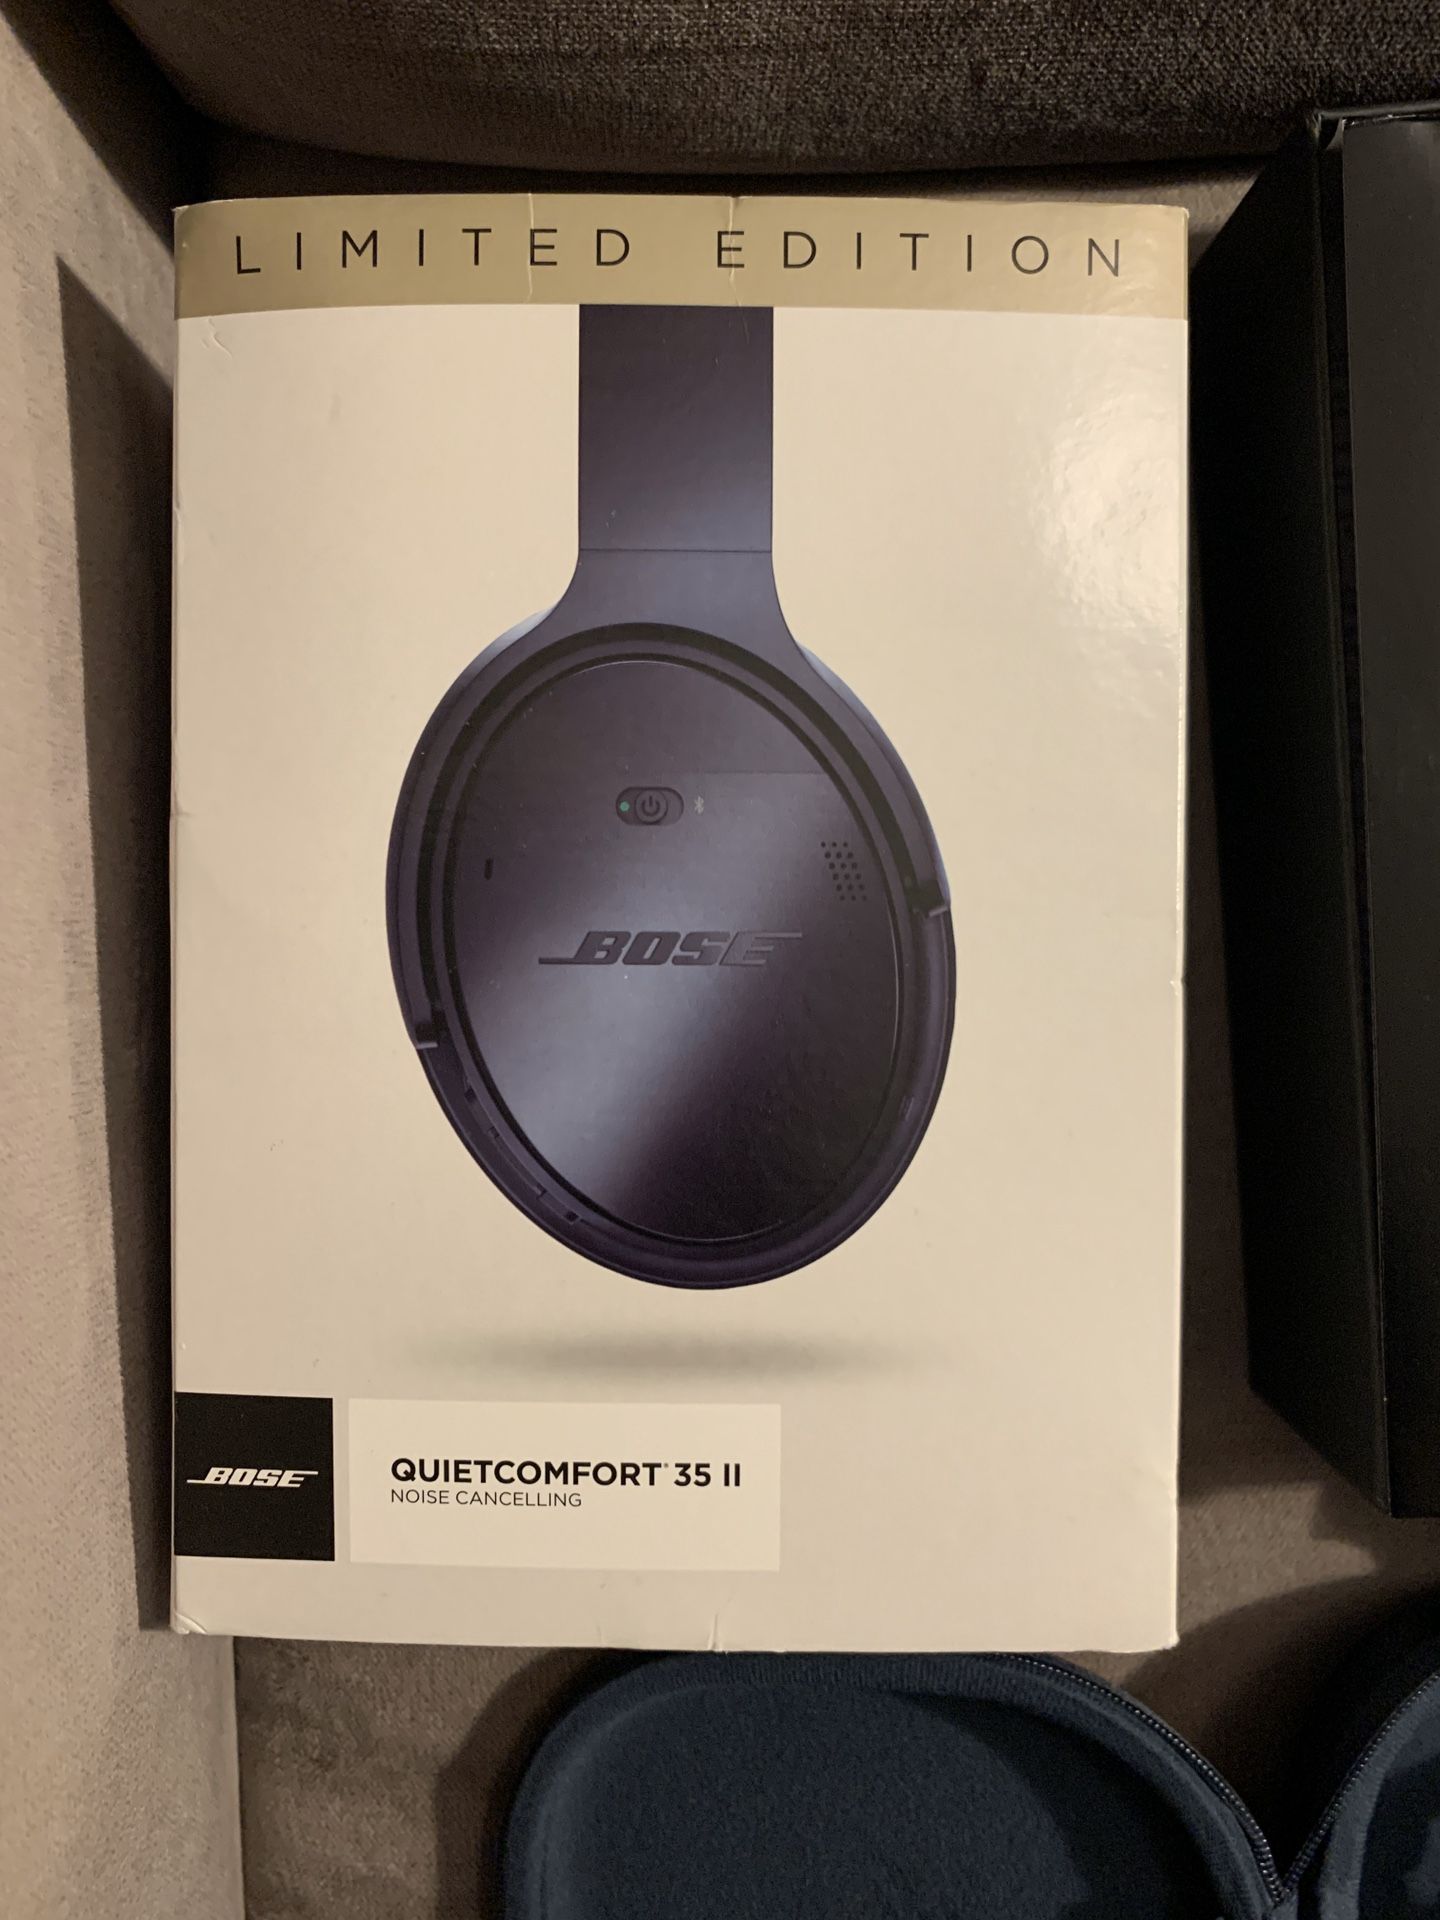 BOSE QUIET COMFORT 35 II (Limited Edition)